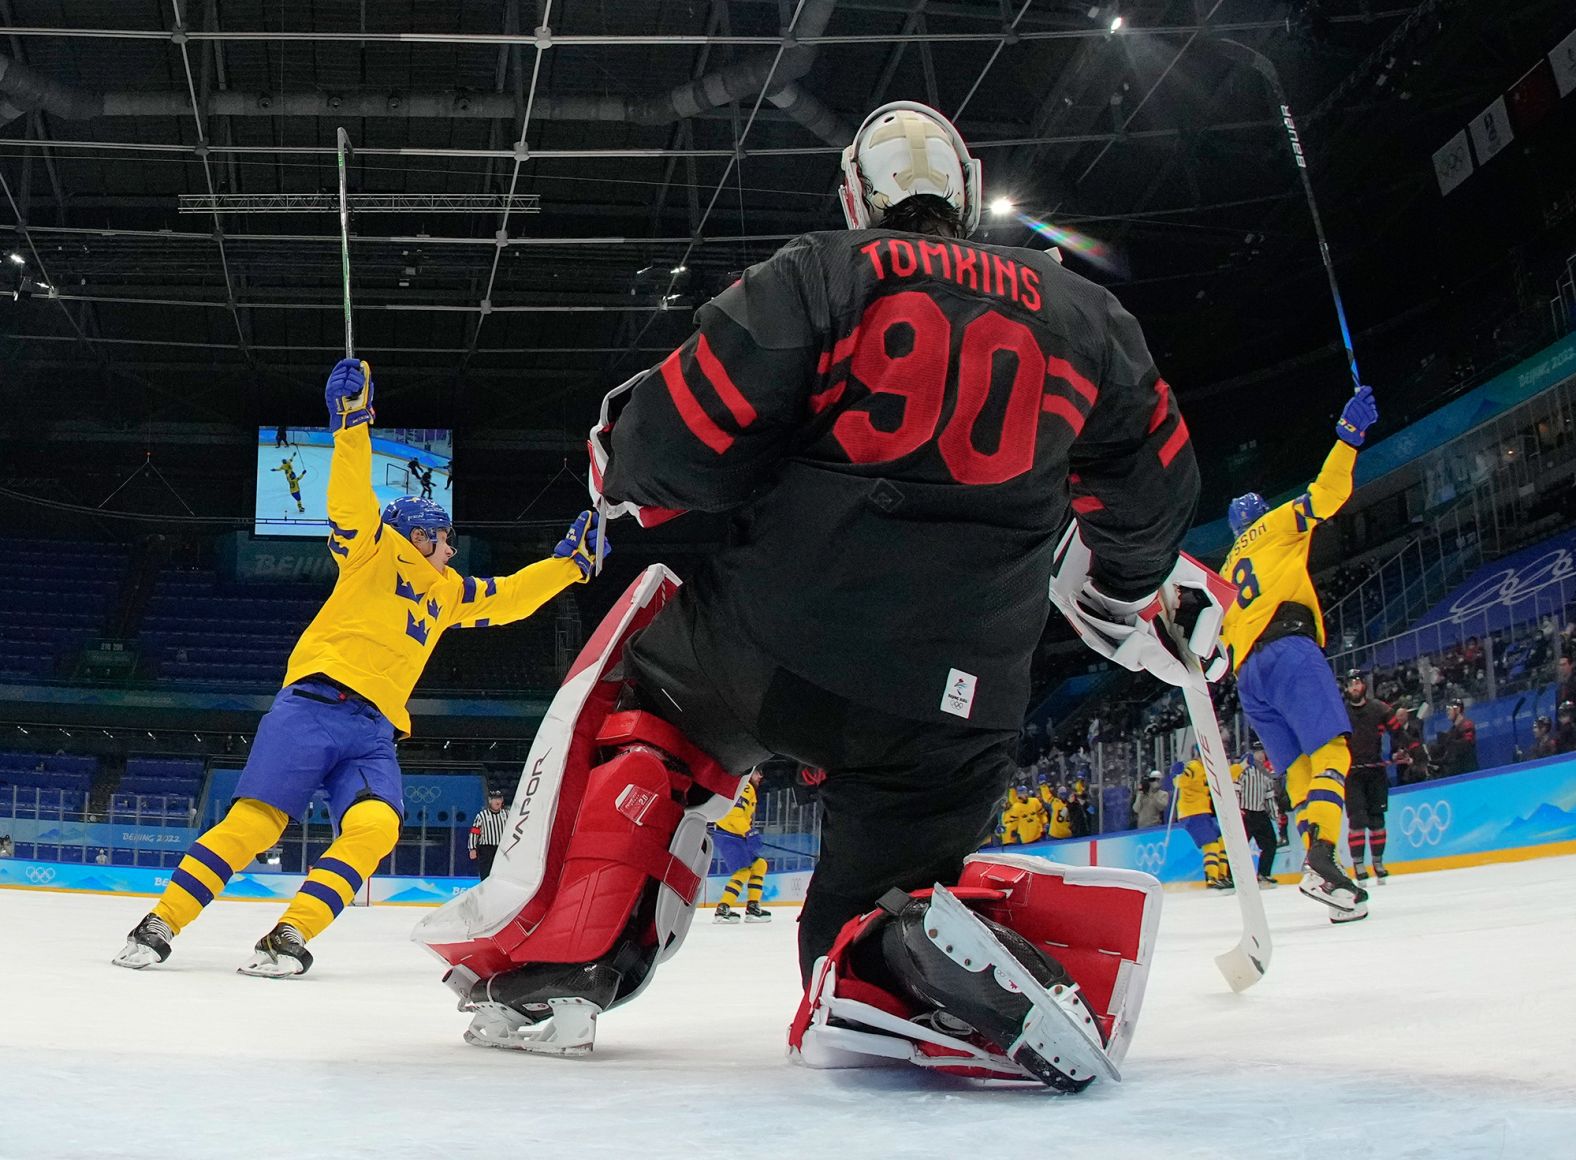 Swedish players celebrate after scoring against Canada during a quarterfinal hockey game on February 16. <a href="index.php?page=&url=https%3A%2F%2Fwww.cnn.com%2Fworld%2Flive-news%2Fbeijing-winter-olympics-02-16-22-spt%2Fh_aacd5686eee40920e1f3695bf6762f84" target="_blank">Sweden defeated the reigning world champions 2-0.</a>